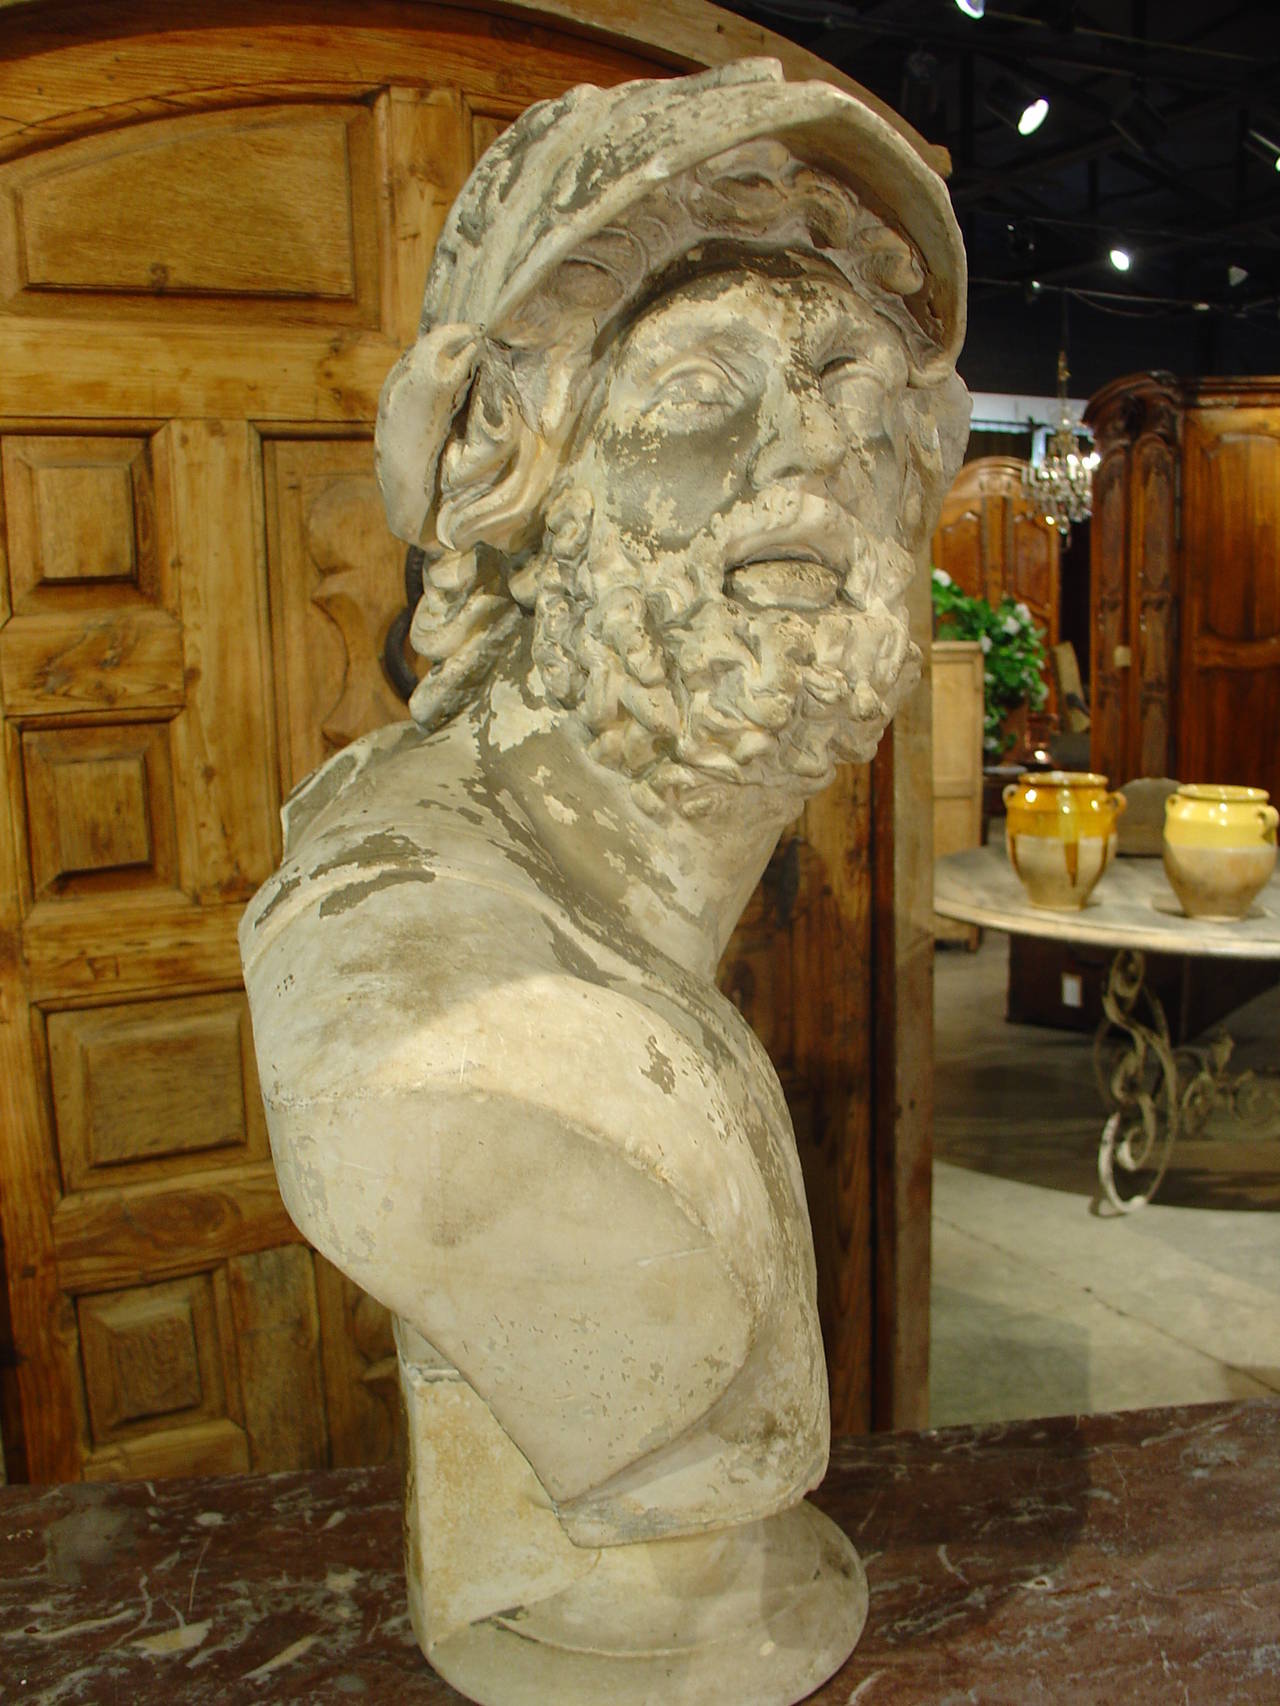 This antique French plaster bust of Menelaus, husband of Helen of Troy was done by a firm in Berlin, Gebruder Micheli, founded in 1824. It is signed and dated 1887 on the back. With its old patination displaying incrustations of chipping paint and